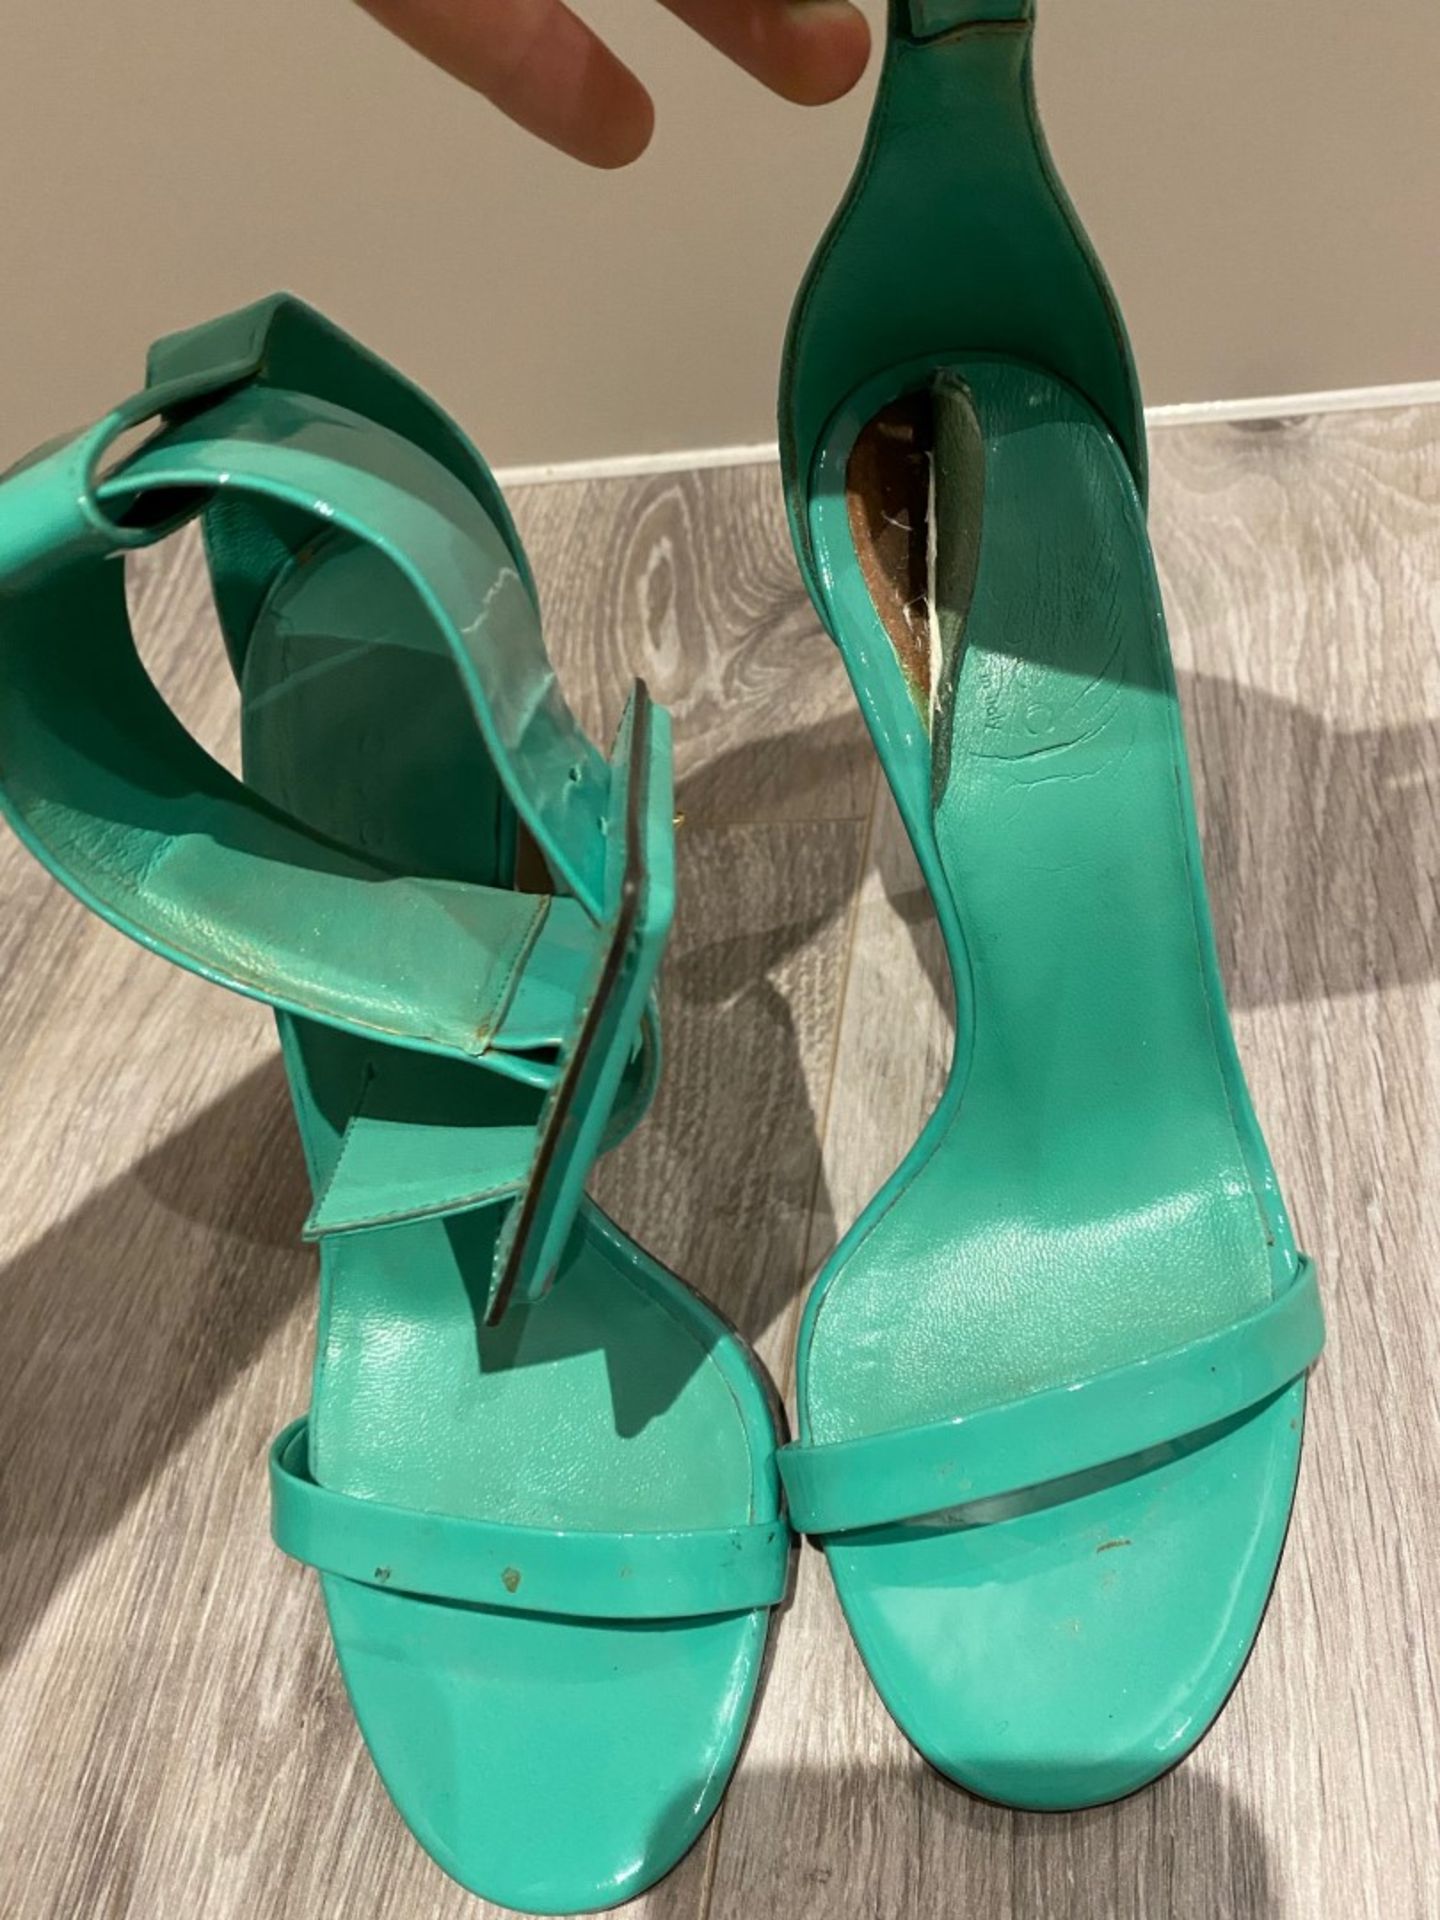 1 x Pair Of Genuine Gucci High Heel Shoes In Green - Size: 36 - Preowned in Worn Condition - Ref: LO - Image 2 of 4